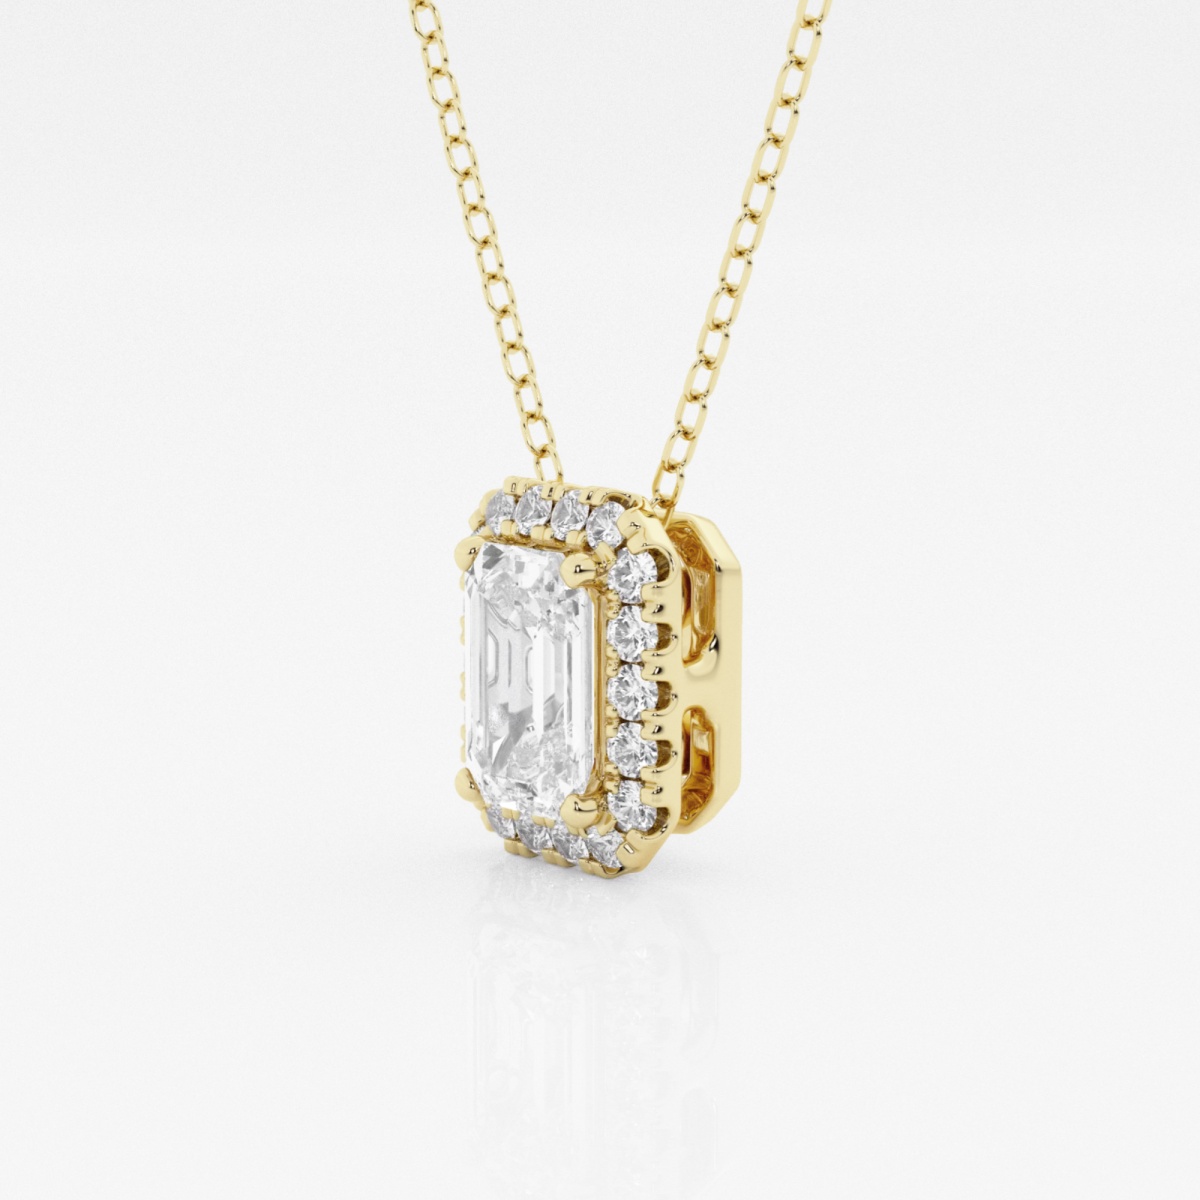 Additional Image 1 for  1 1/6 ctw Emerald Lab Grown Diamond Halo Pendant with Adjustable Chain